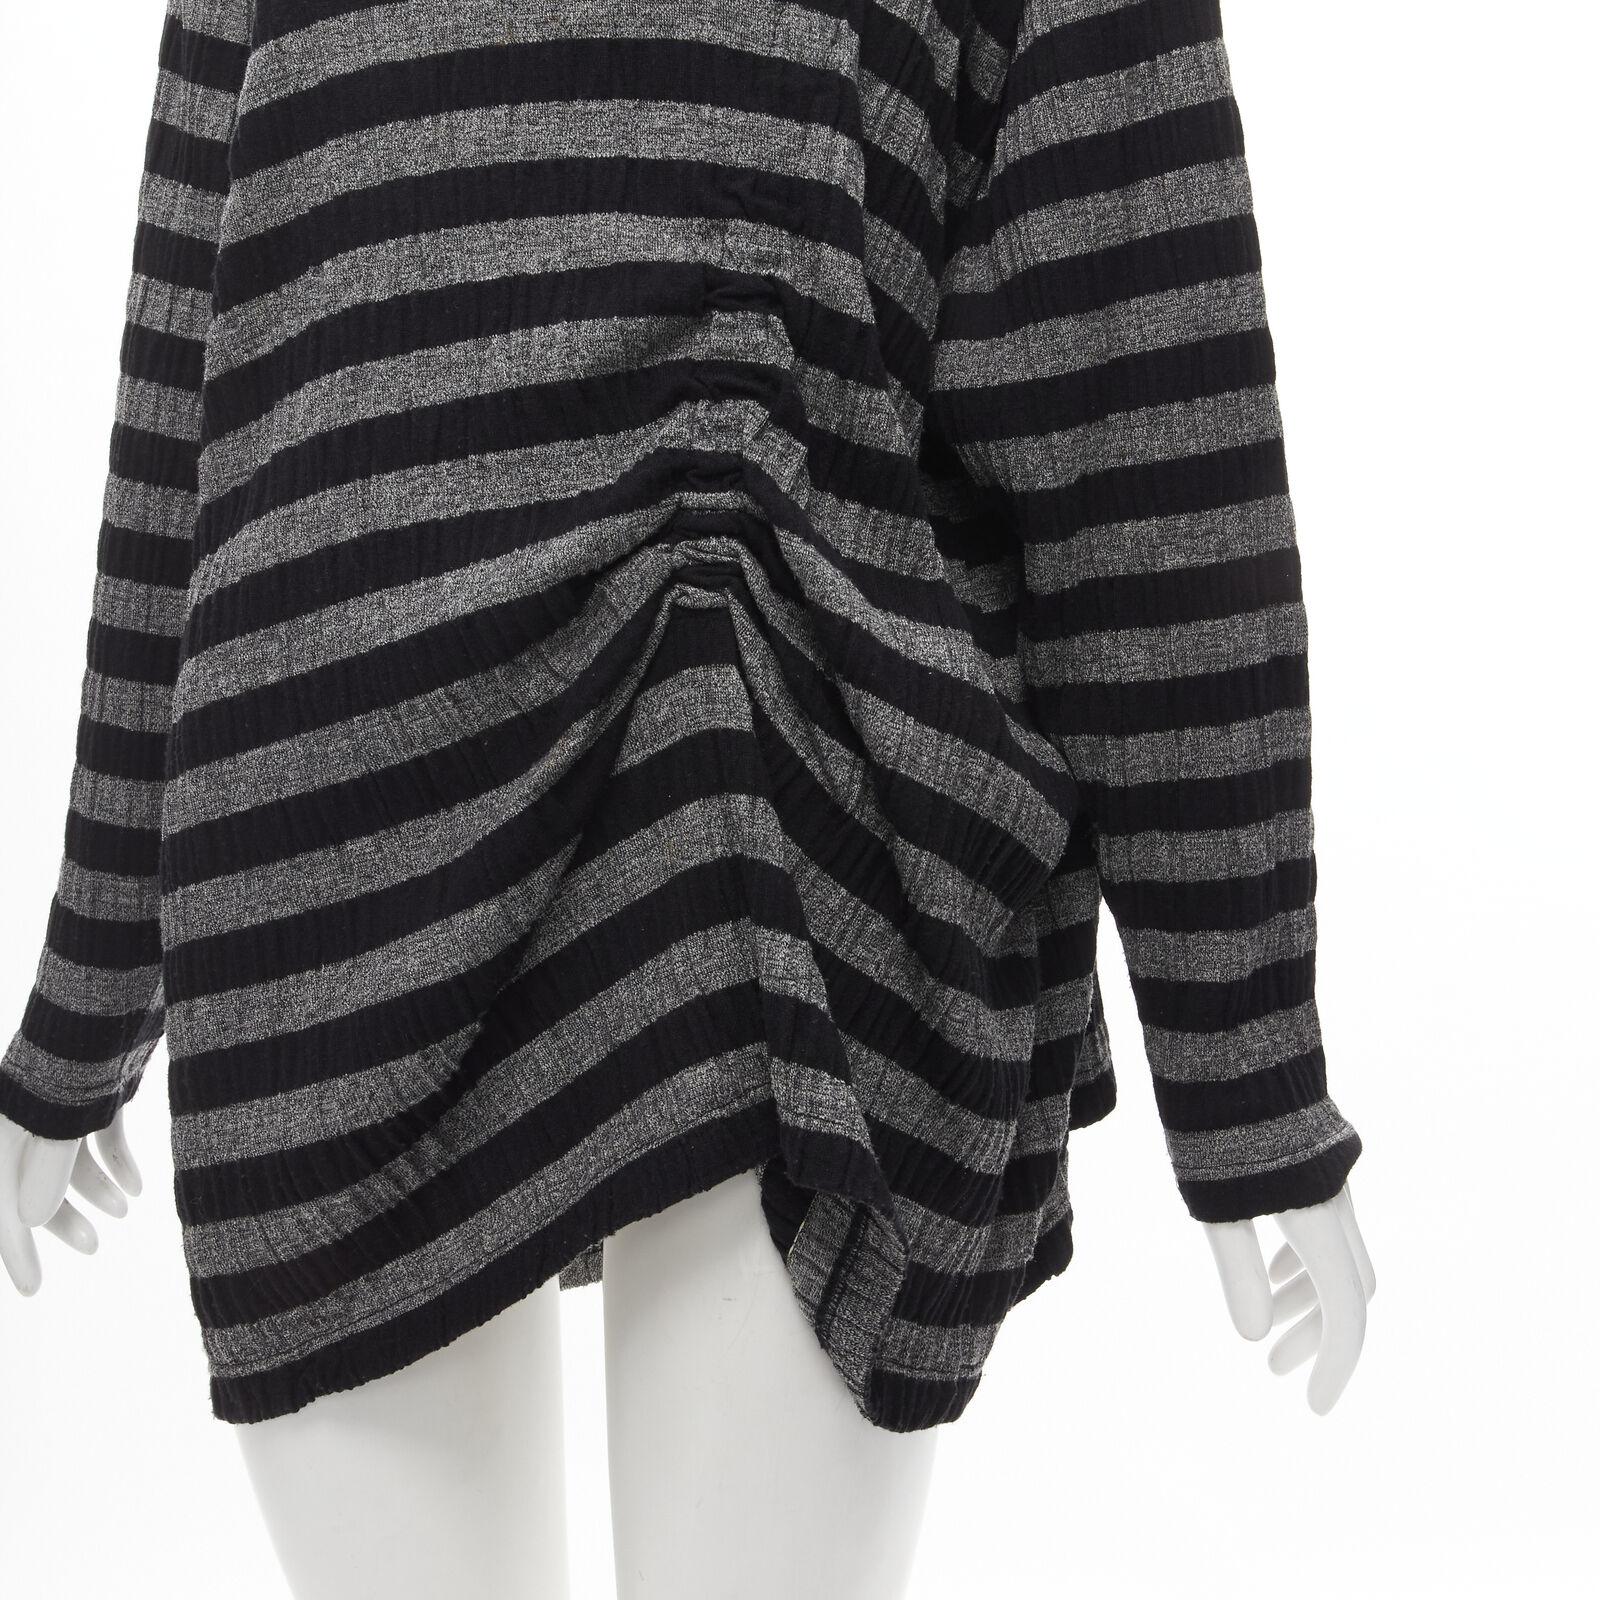 ISSEY MIYAKE 1980s Vintage grey black stripe draped gathered sweater S
Reference: CRTI/A00501
Brand: Issey Miyake
Collection: 1980s
Material: Acrylic, Wool
Color: Grey, Black
Pattern: Striped
Extra Details: Elastic band built into the sweater to